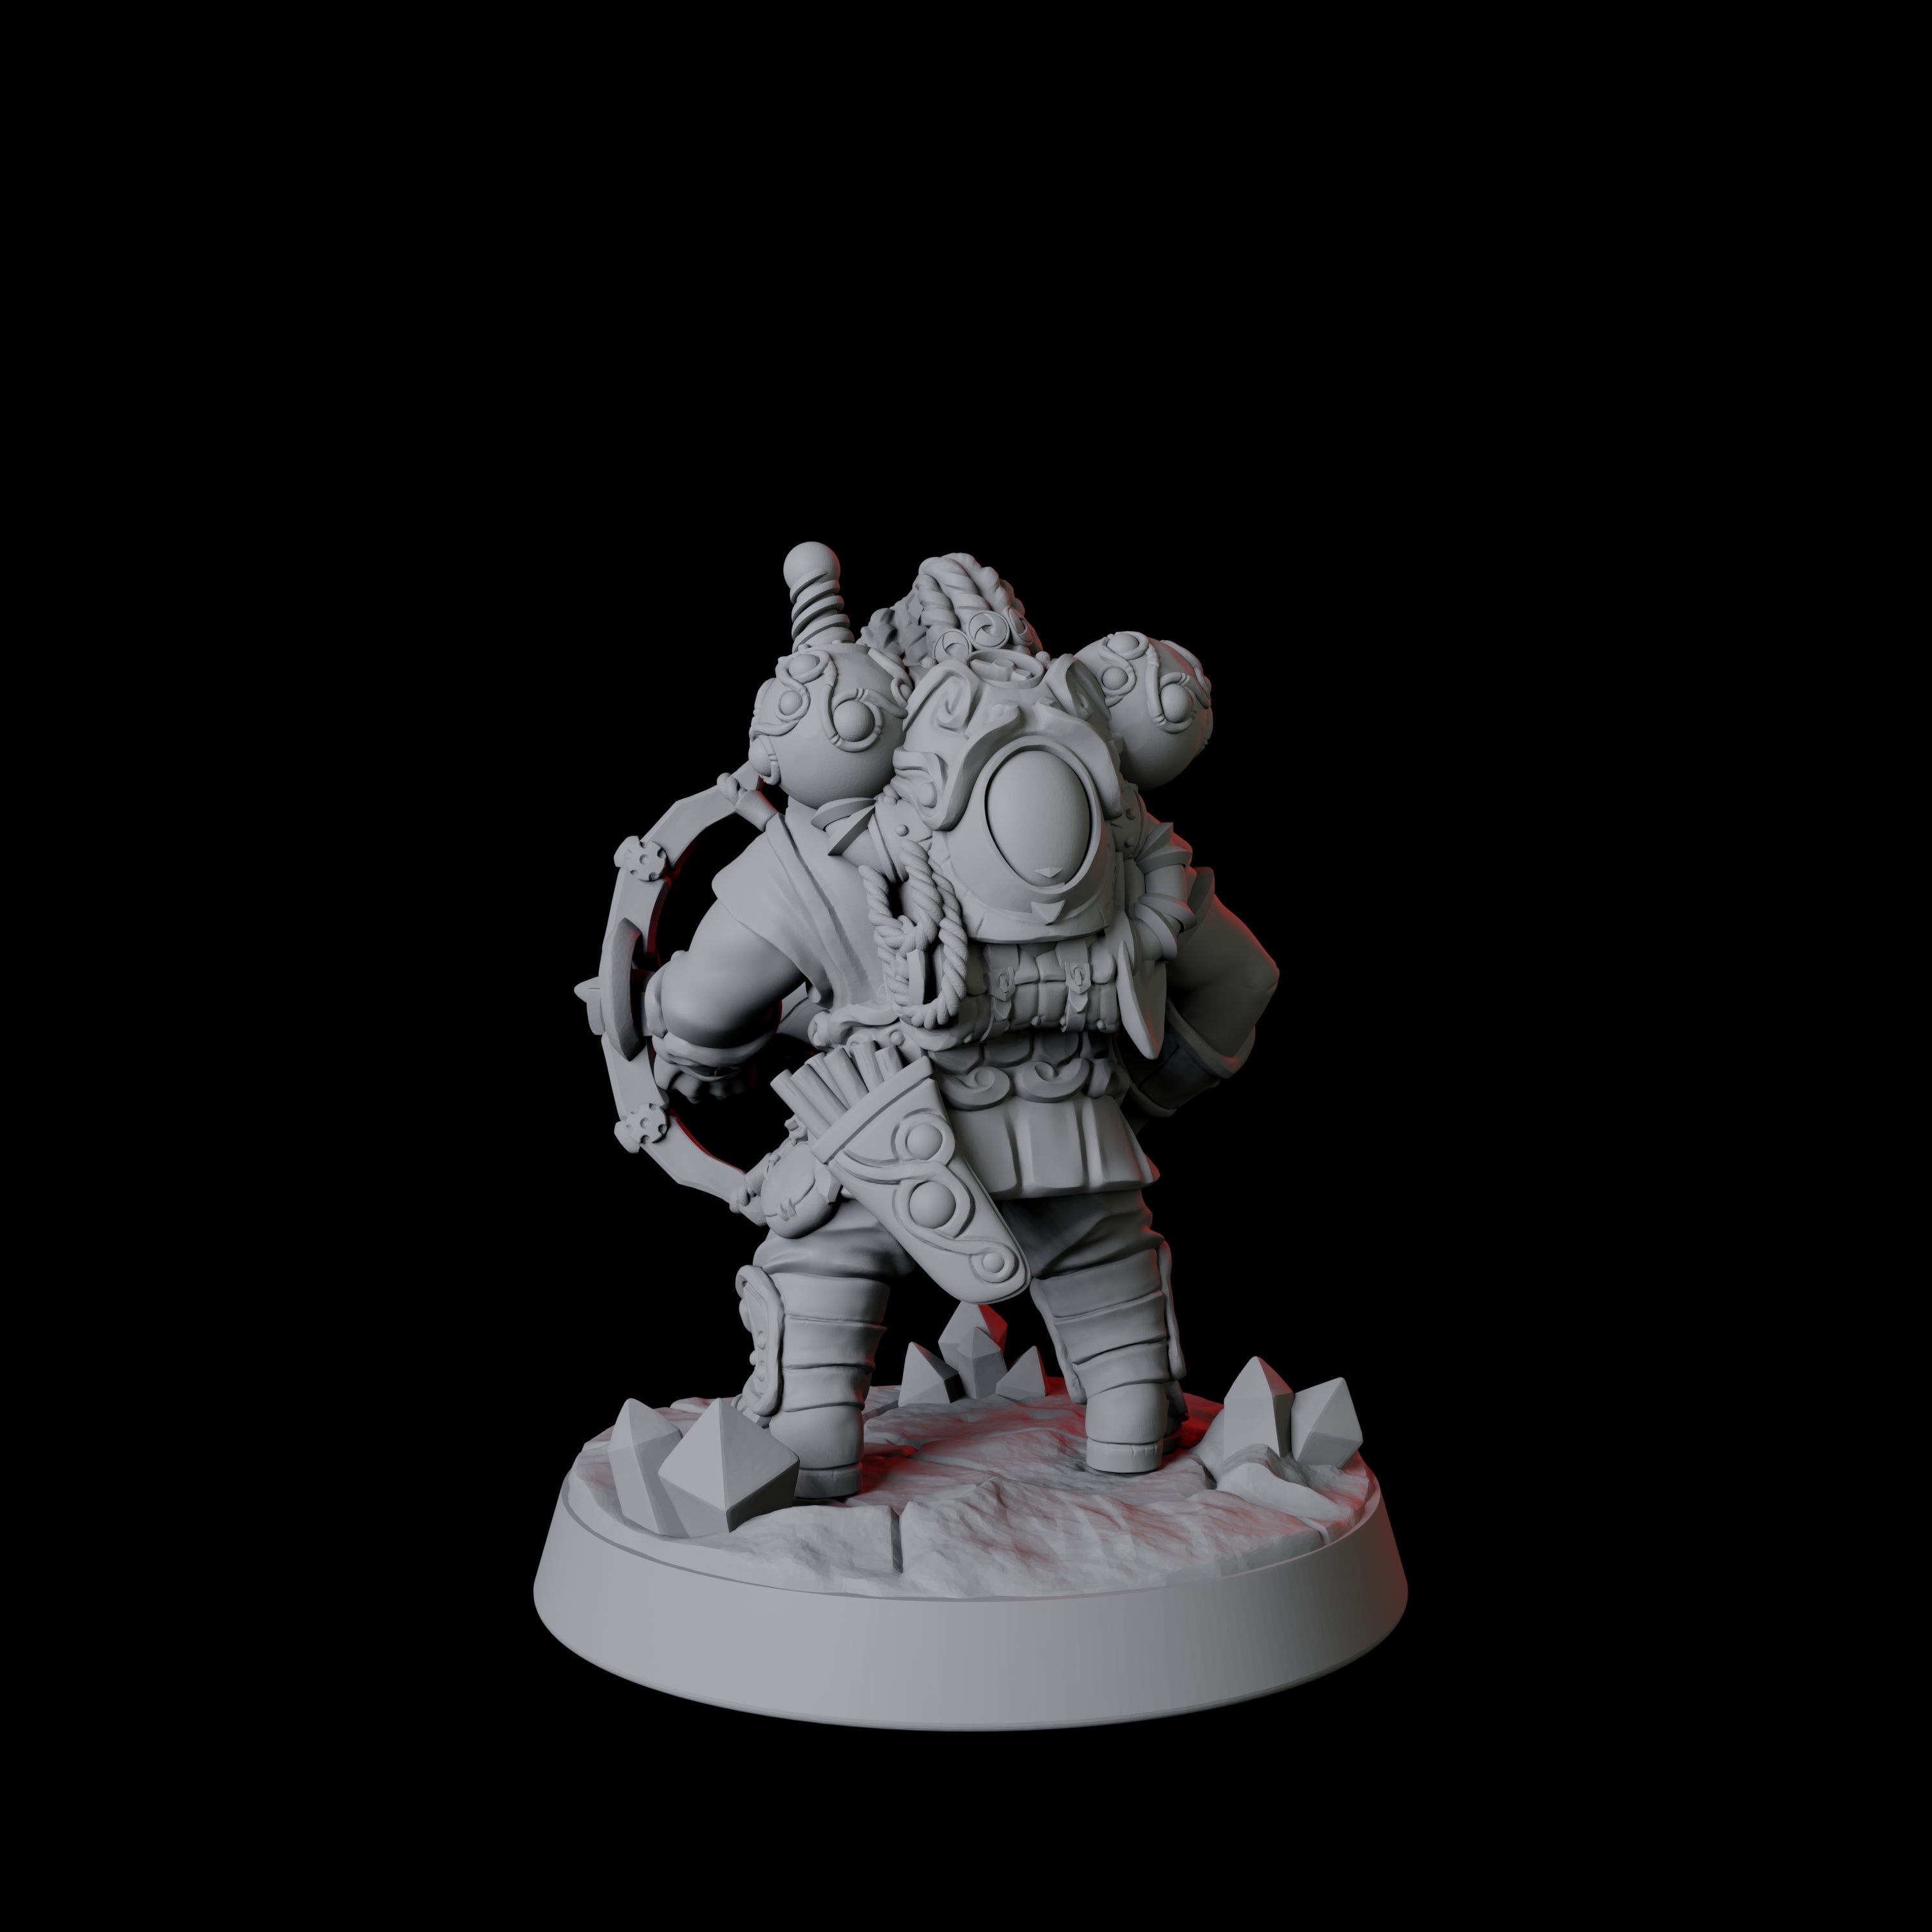 Deep Gnome Artificer B Miniature for Dungeons and Dragons, Pathfinder or other TTRPGs